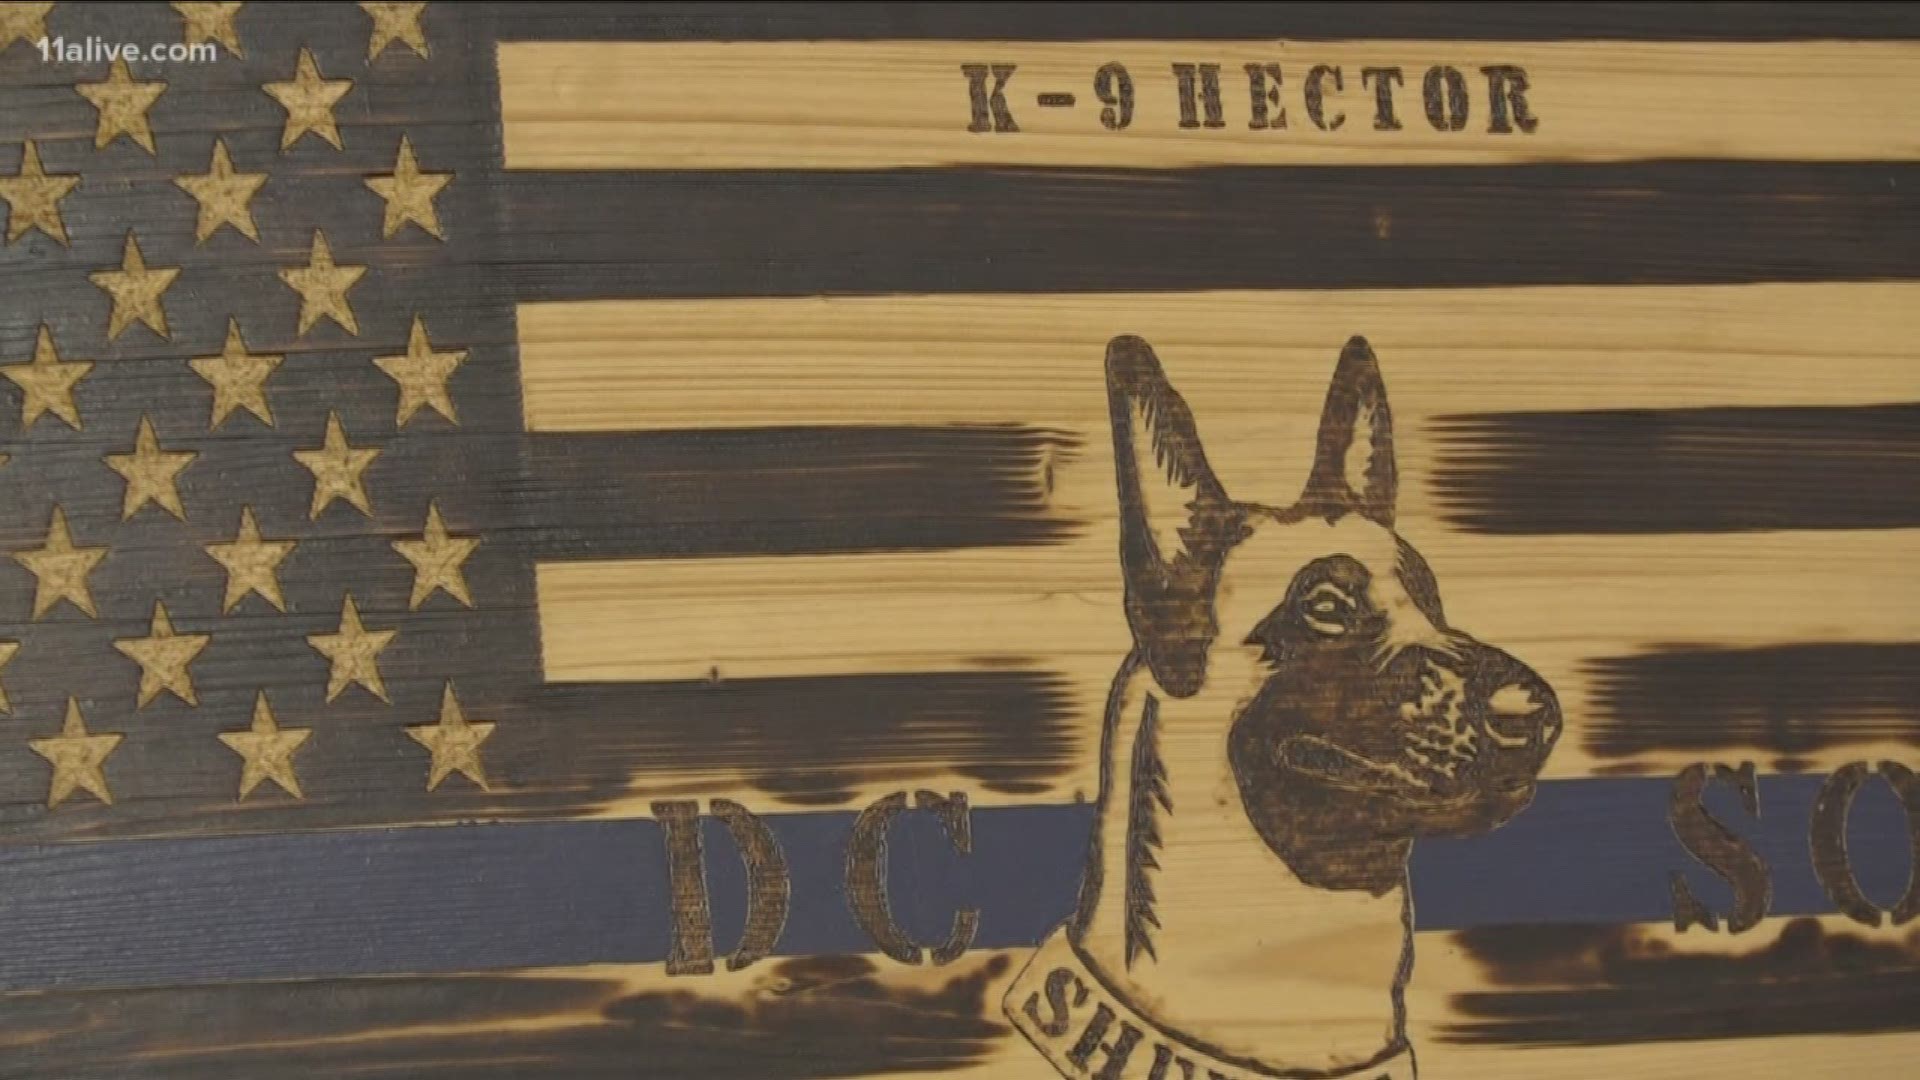 K9 Hector passed away from natural causes.